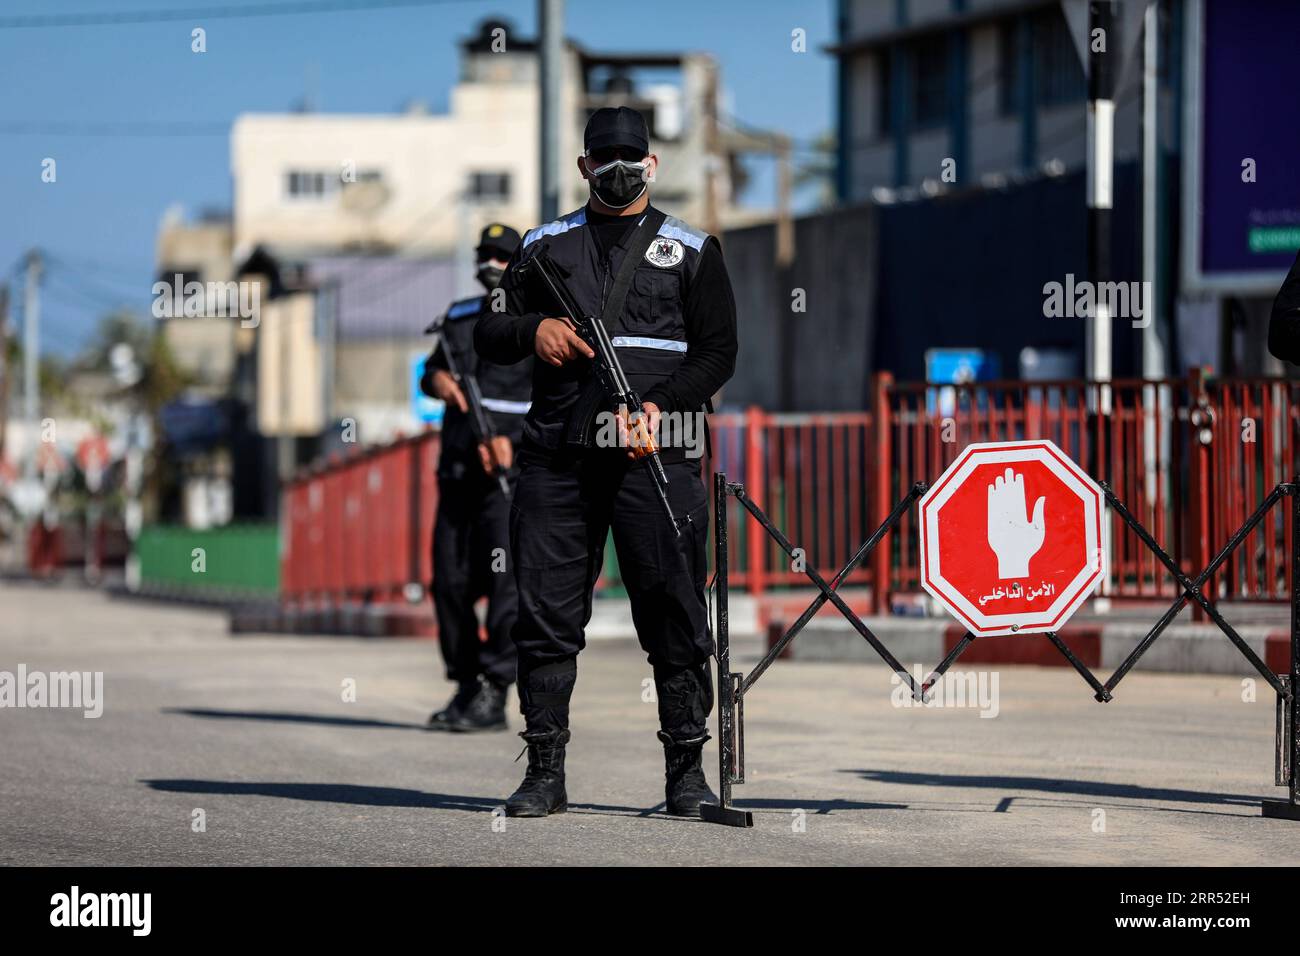 201219 -- GAZA, Dec. 19, 2020 -- Palestinian policemen stand guard in the Gaza Strip city of Khan Younis amid a lockdown, on Dec. 19, 2020. A full lockdown and curfew have been imposed in the West Bank and the Gaza Strip to curb the growing numbers of COVID-19 infections and deaths. Photo by /Xinhua MIDEAST-GAZA-KHAN YOUNIS-COVID-19-LOCKDOWN YasserxQudih PUBLICATIONxNOTxINxCHN Stock Photo